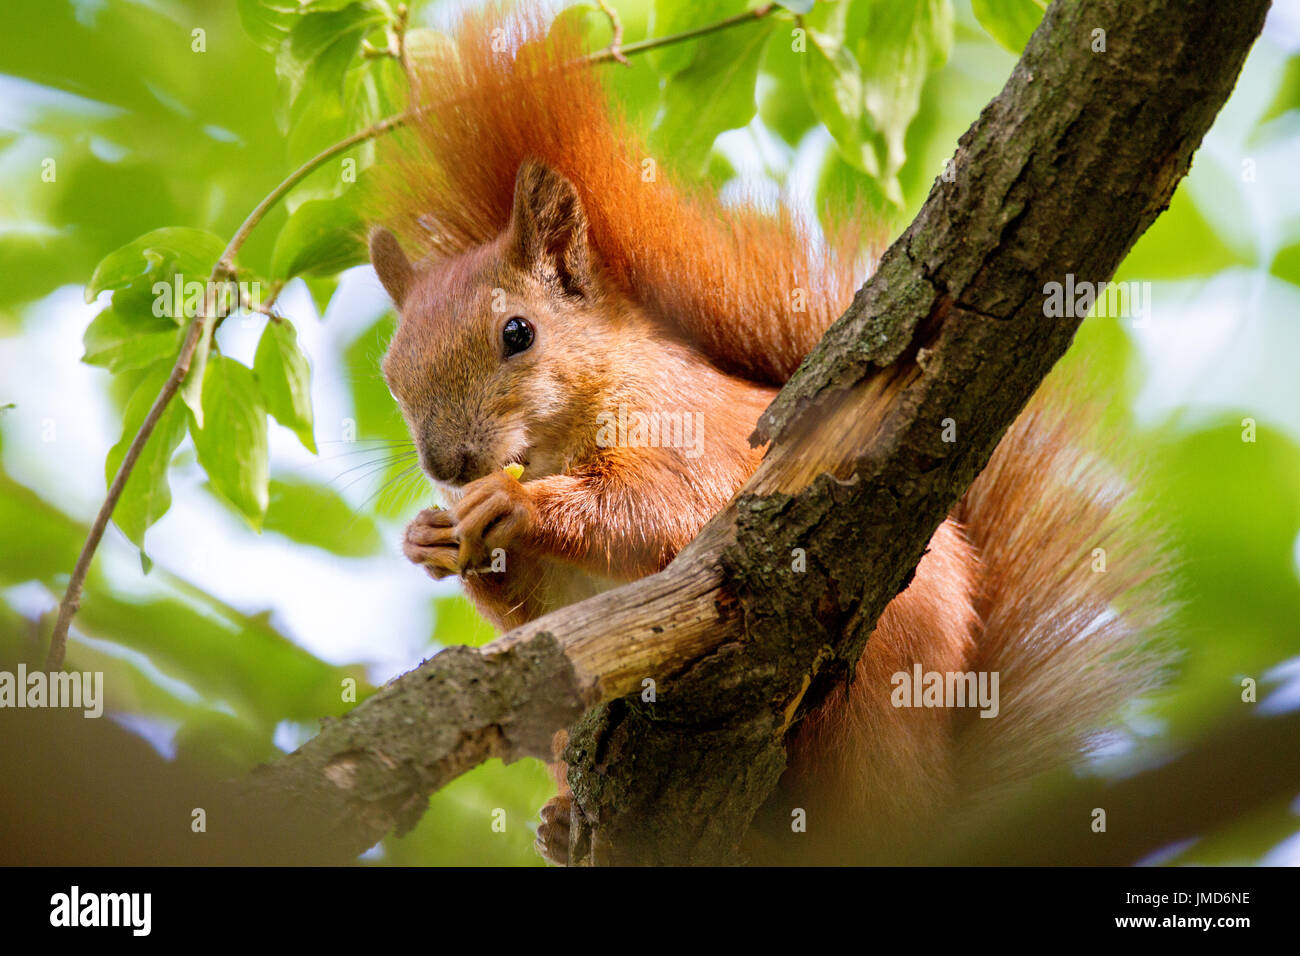 An image of a wild animal a squirrel on a tree eats Stock Photo